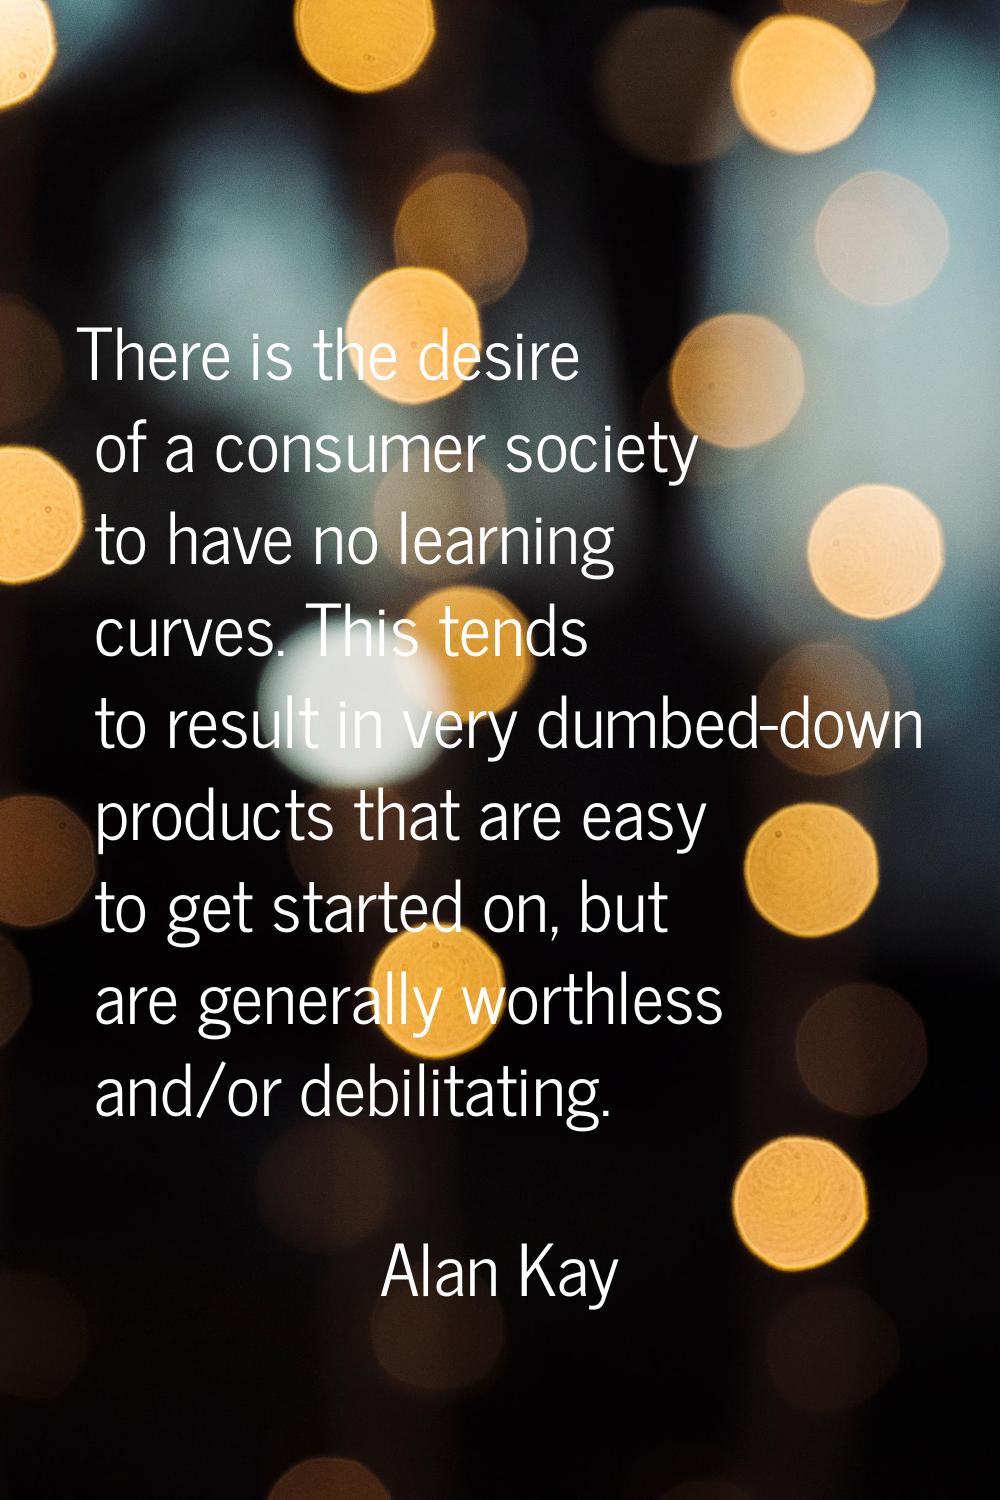 There is the desire of a consumer society to have no learning curves. This tends to result in very 